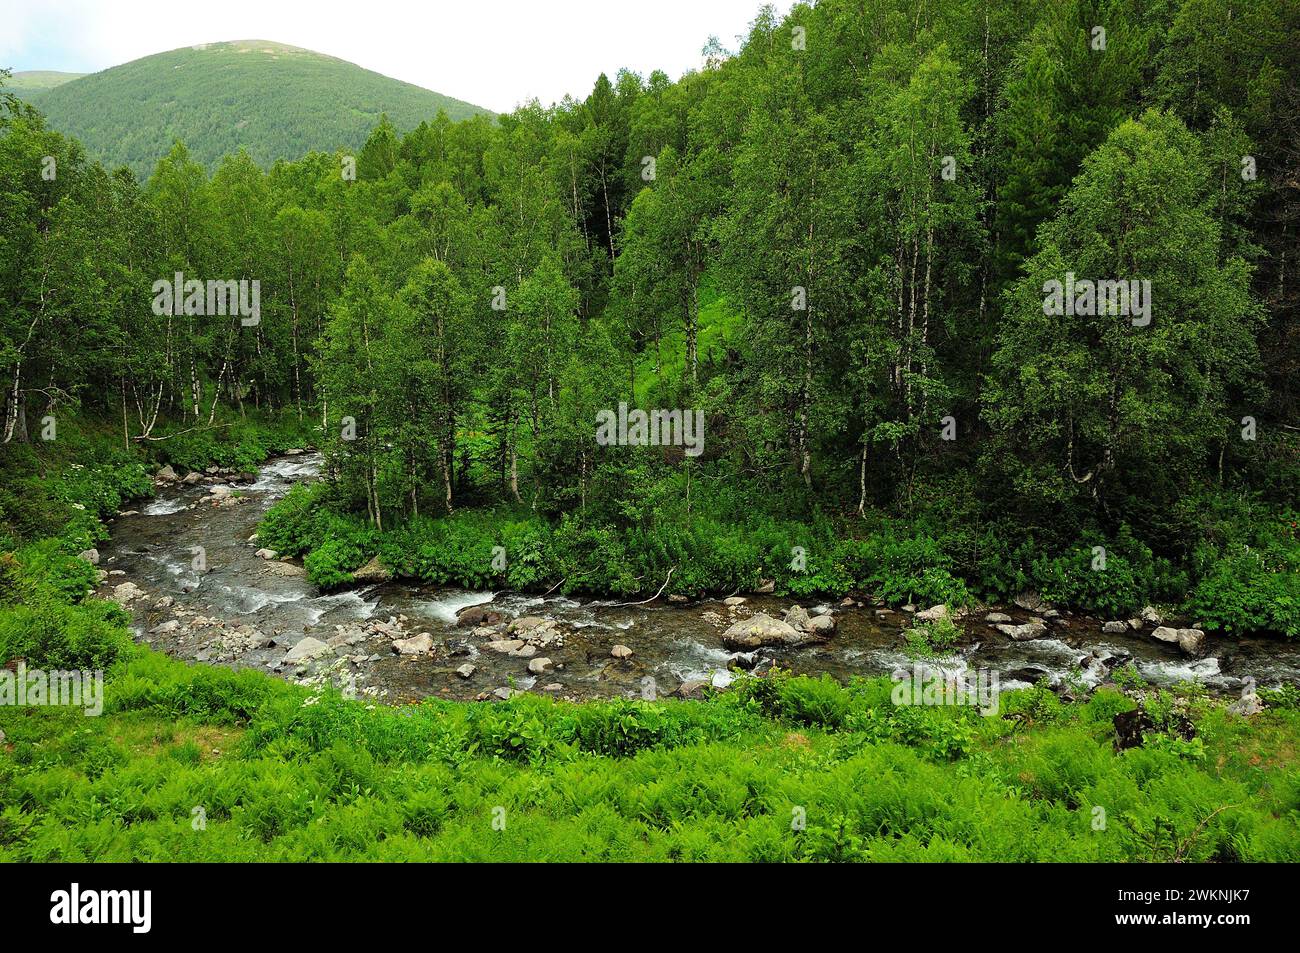 A view from above on a small stormy river flowing through a dense forest on a cloudy summer morning. Sarala river, Khakassia, Siberia, Russia. Stock Photo